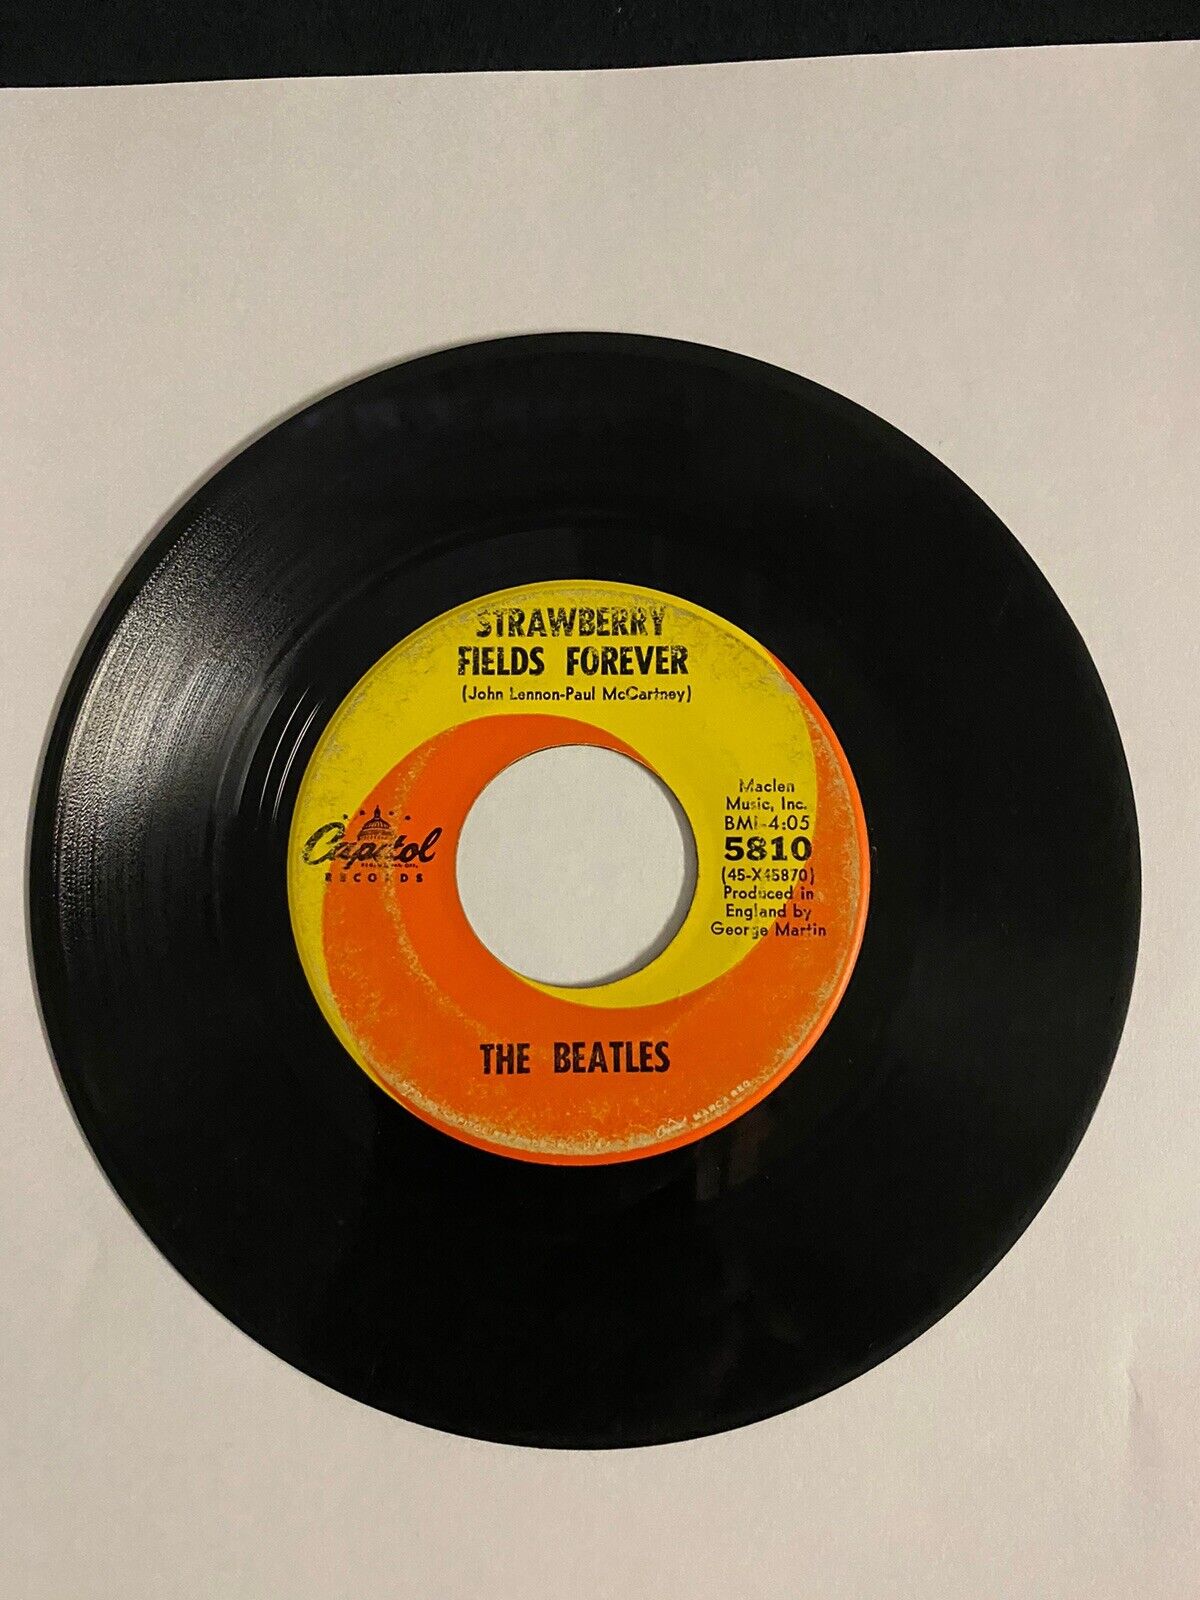 7" 45 RPM RECORD by THE BEATLES "STRAWBERRY FIELDS FOREVER & PENNY LANE" (1967)